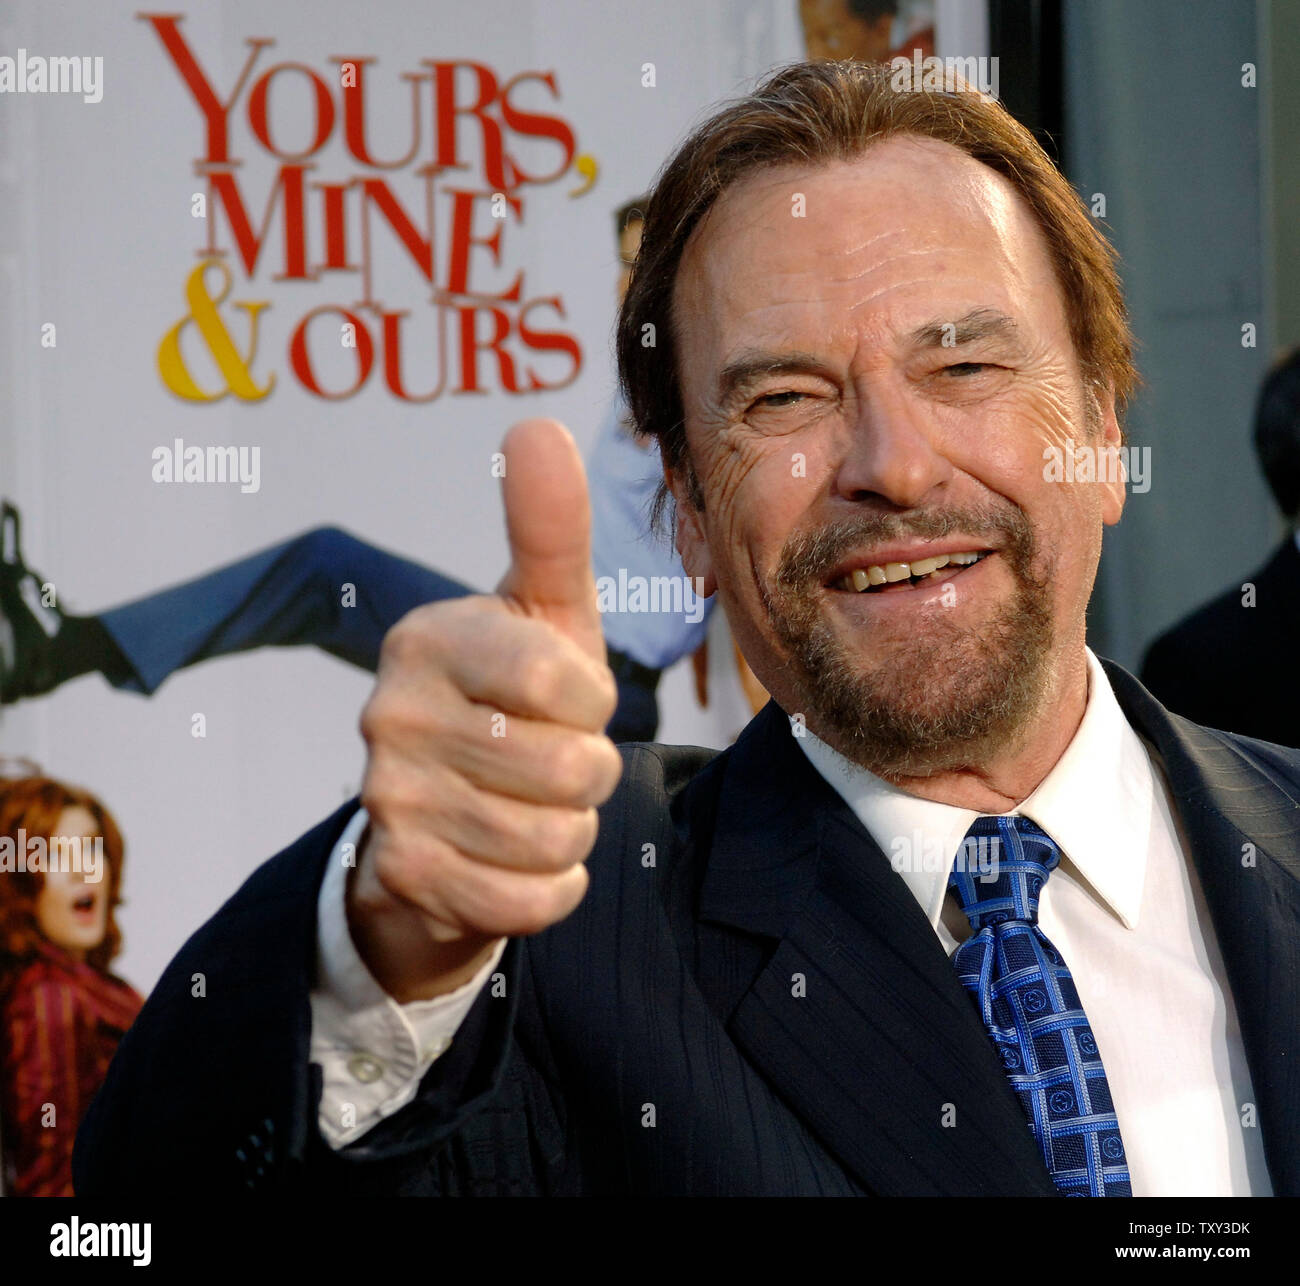 Actor Rip Torn, a cast member in the motion picture romantic comedy 'Yours, Mine & Ours' arrives for the premiere of the film at the Arclight Theatre in Los Angeles, November 20, 2005. The film, starring Dennis Quaid and Rene Russo opens in the United States Nov. 23.  (UPI Photo/Jim Ruymen) Stock Photo